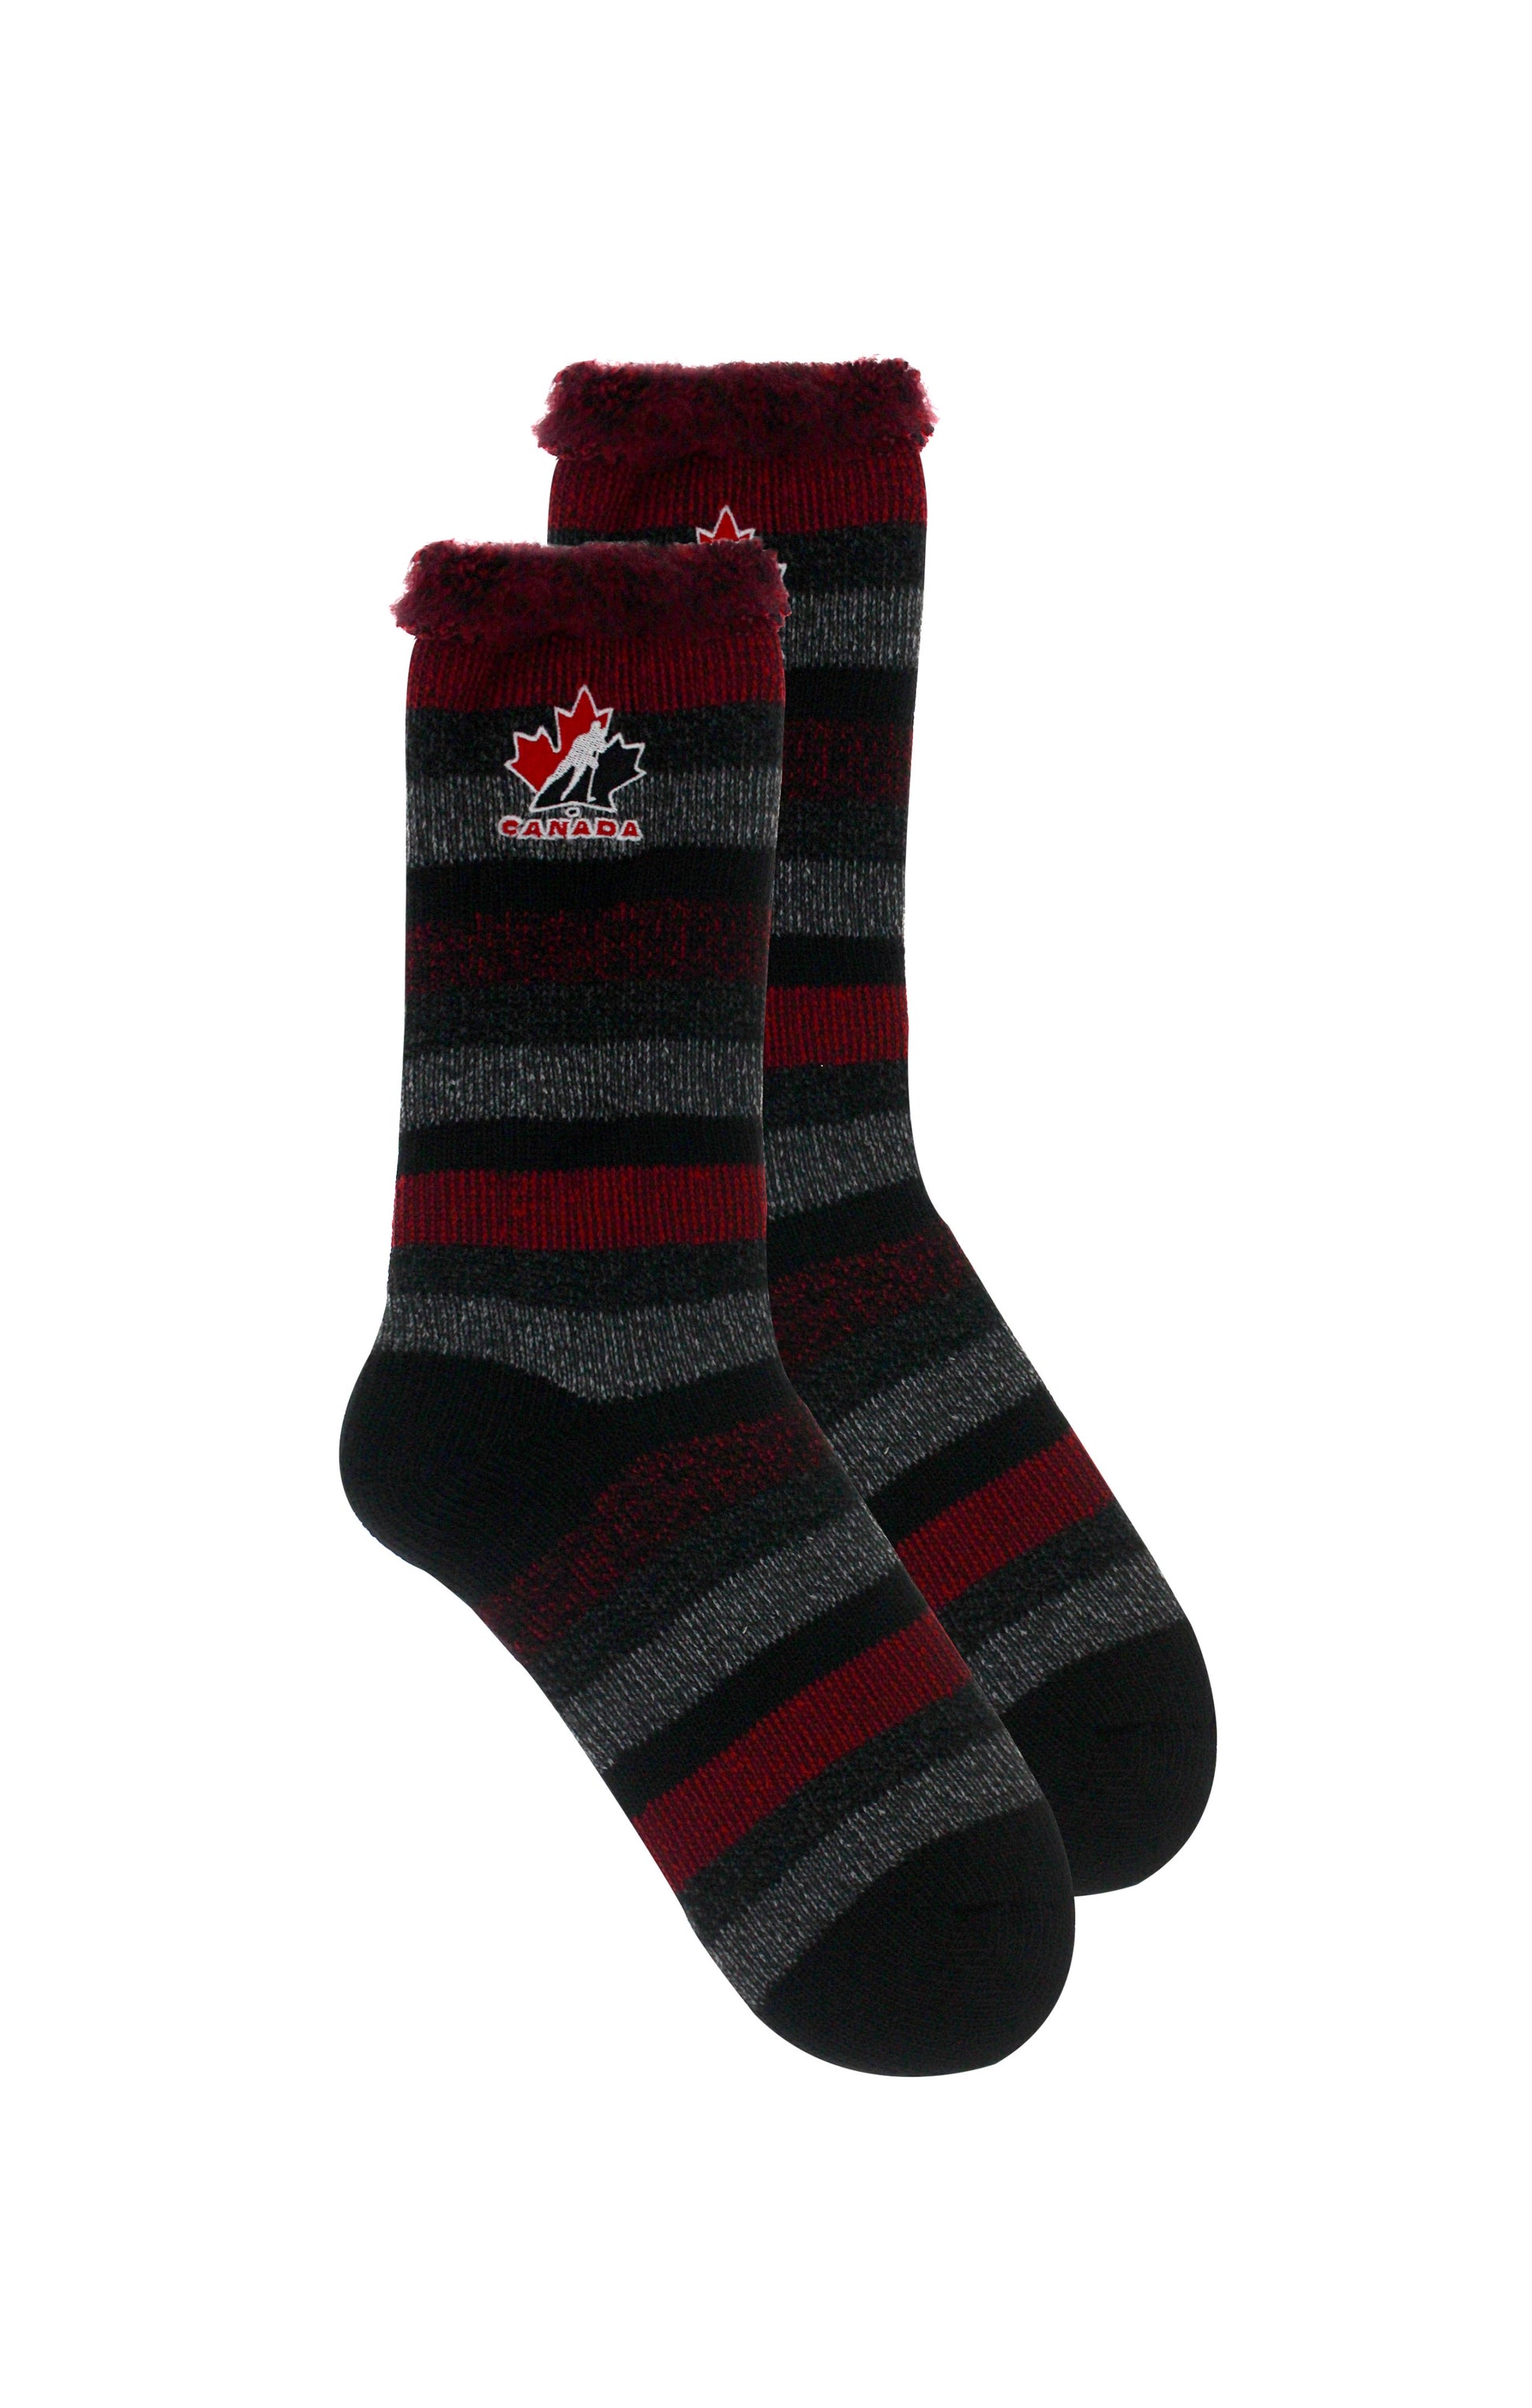 Gertex Hockey Canada Men's Thermal Crew Socks With Embroidery